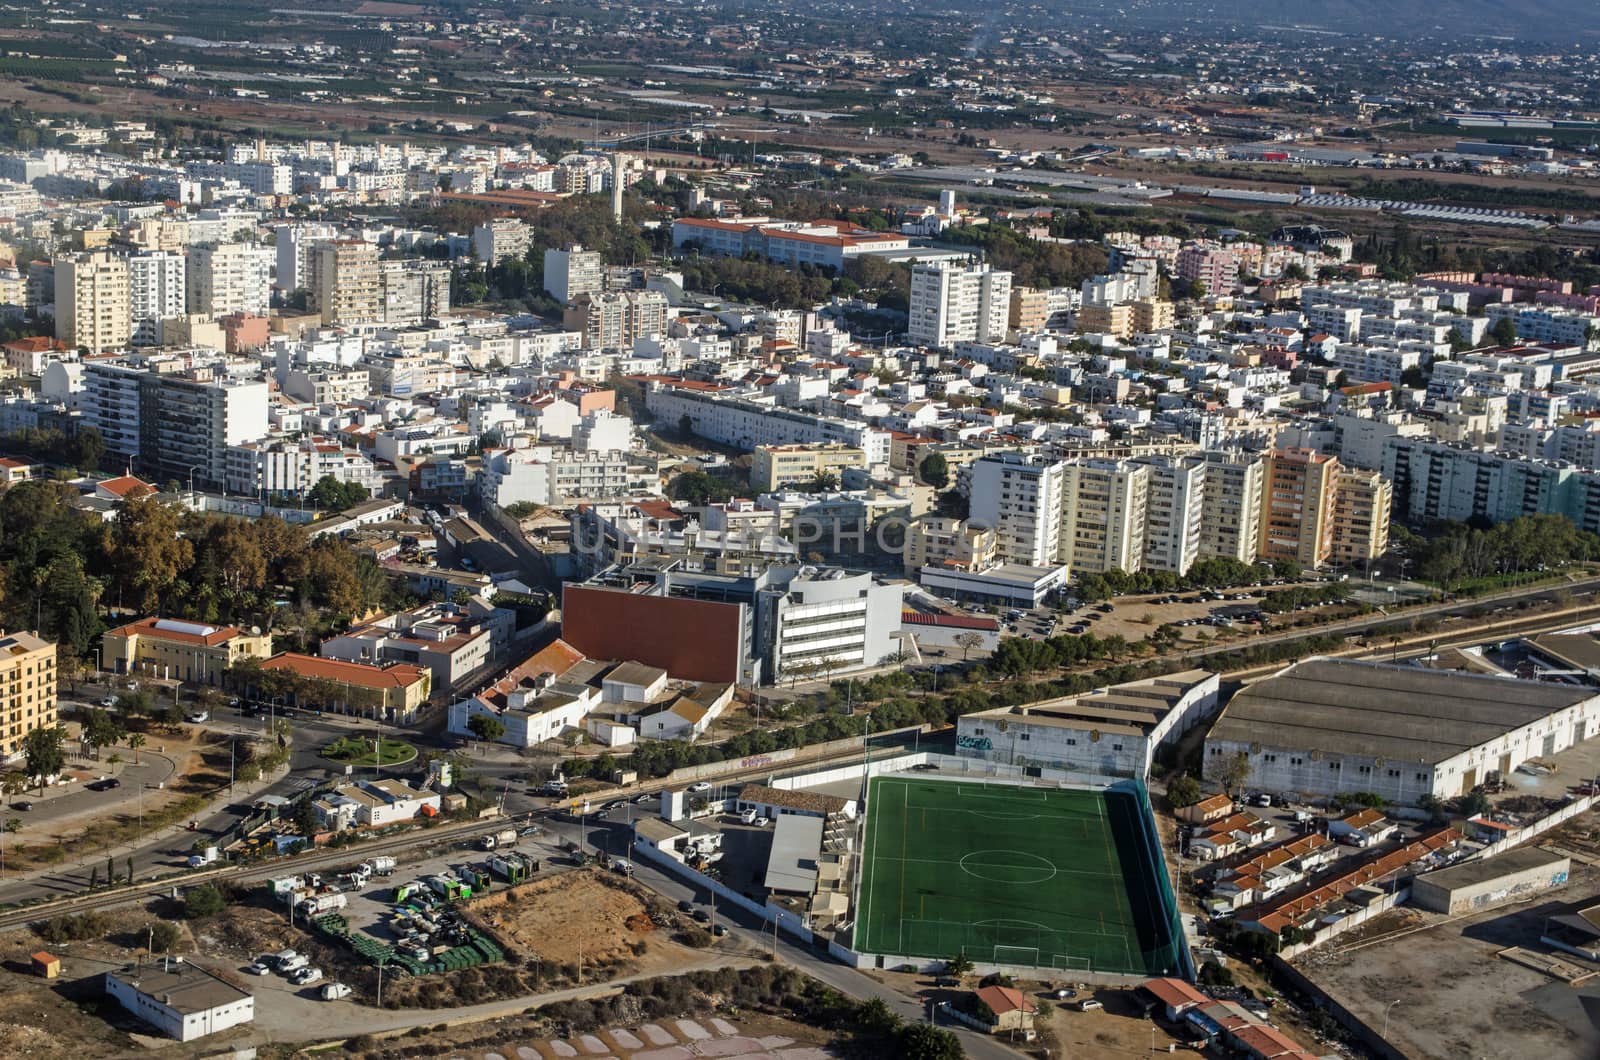 Aerial view of Faro on the Algarve Coast of Portugal with the Escola de Futebol, football school to the foreground.